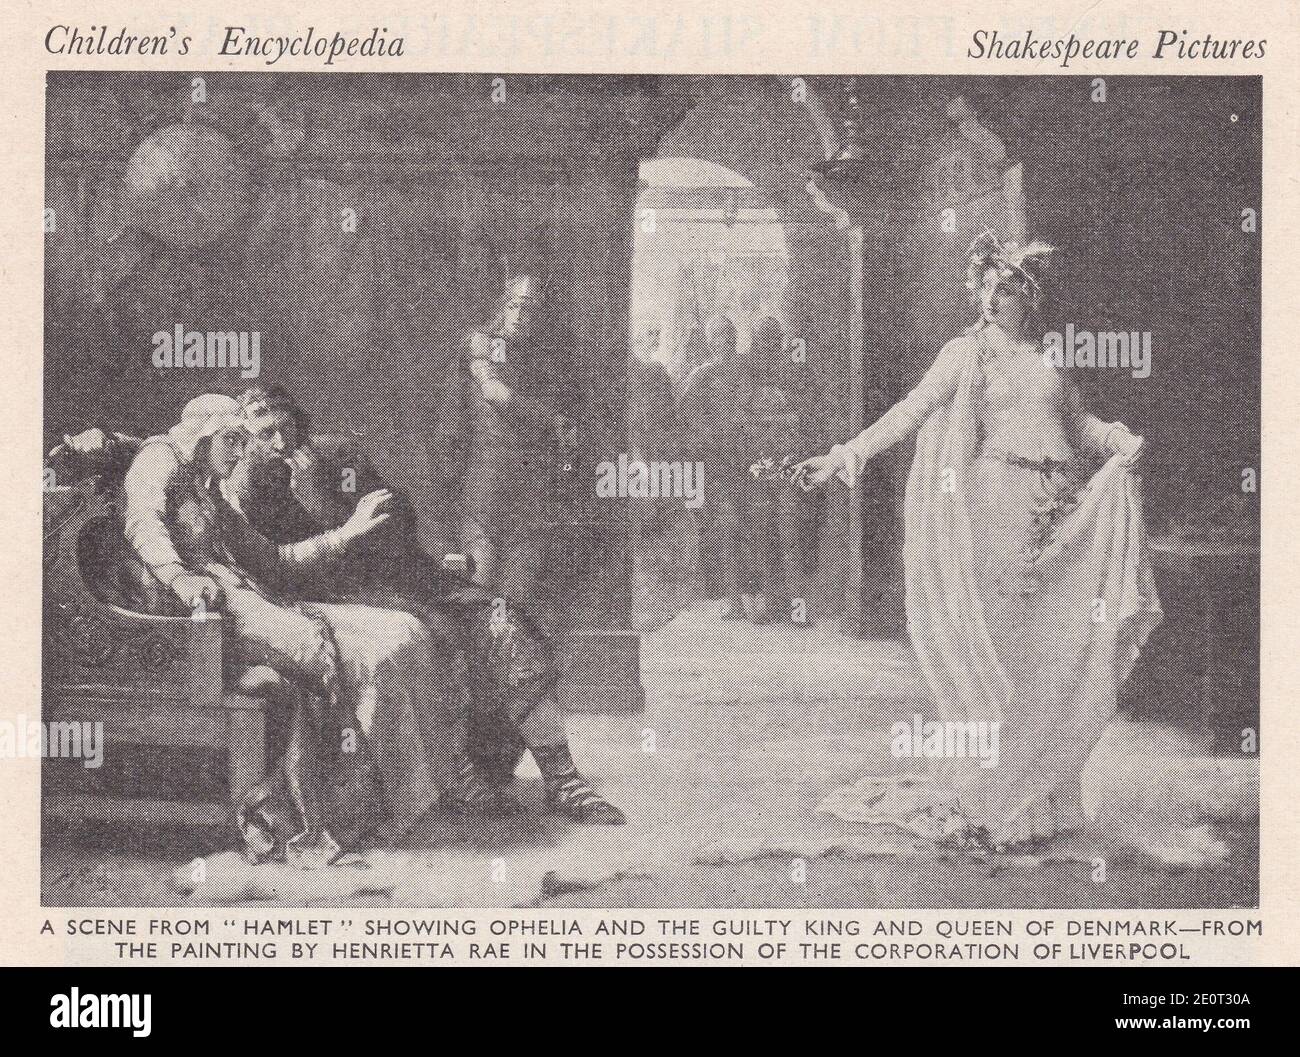 Scenes from Shakespeare's Plays - Scene from Hamlet showing Ophelia and the guilty King and Queen of Denmark. Stock Photo